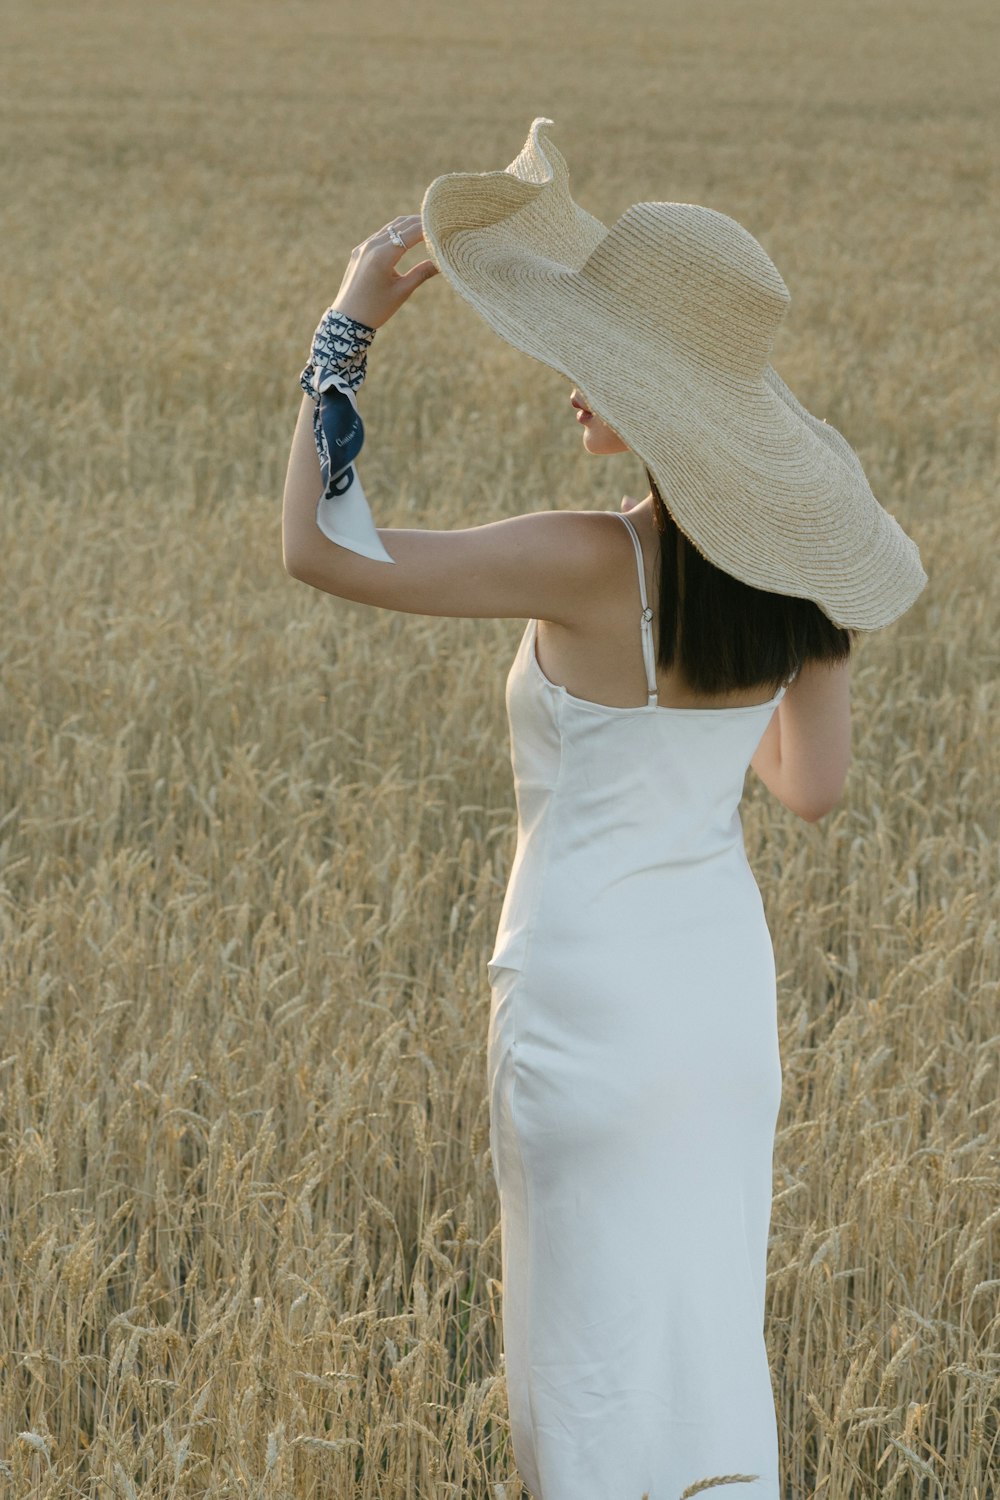 woman in white sleeveless dress standing on brown grass field during daytime